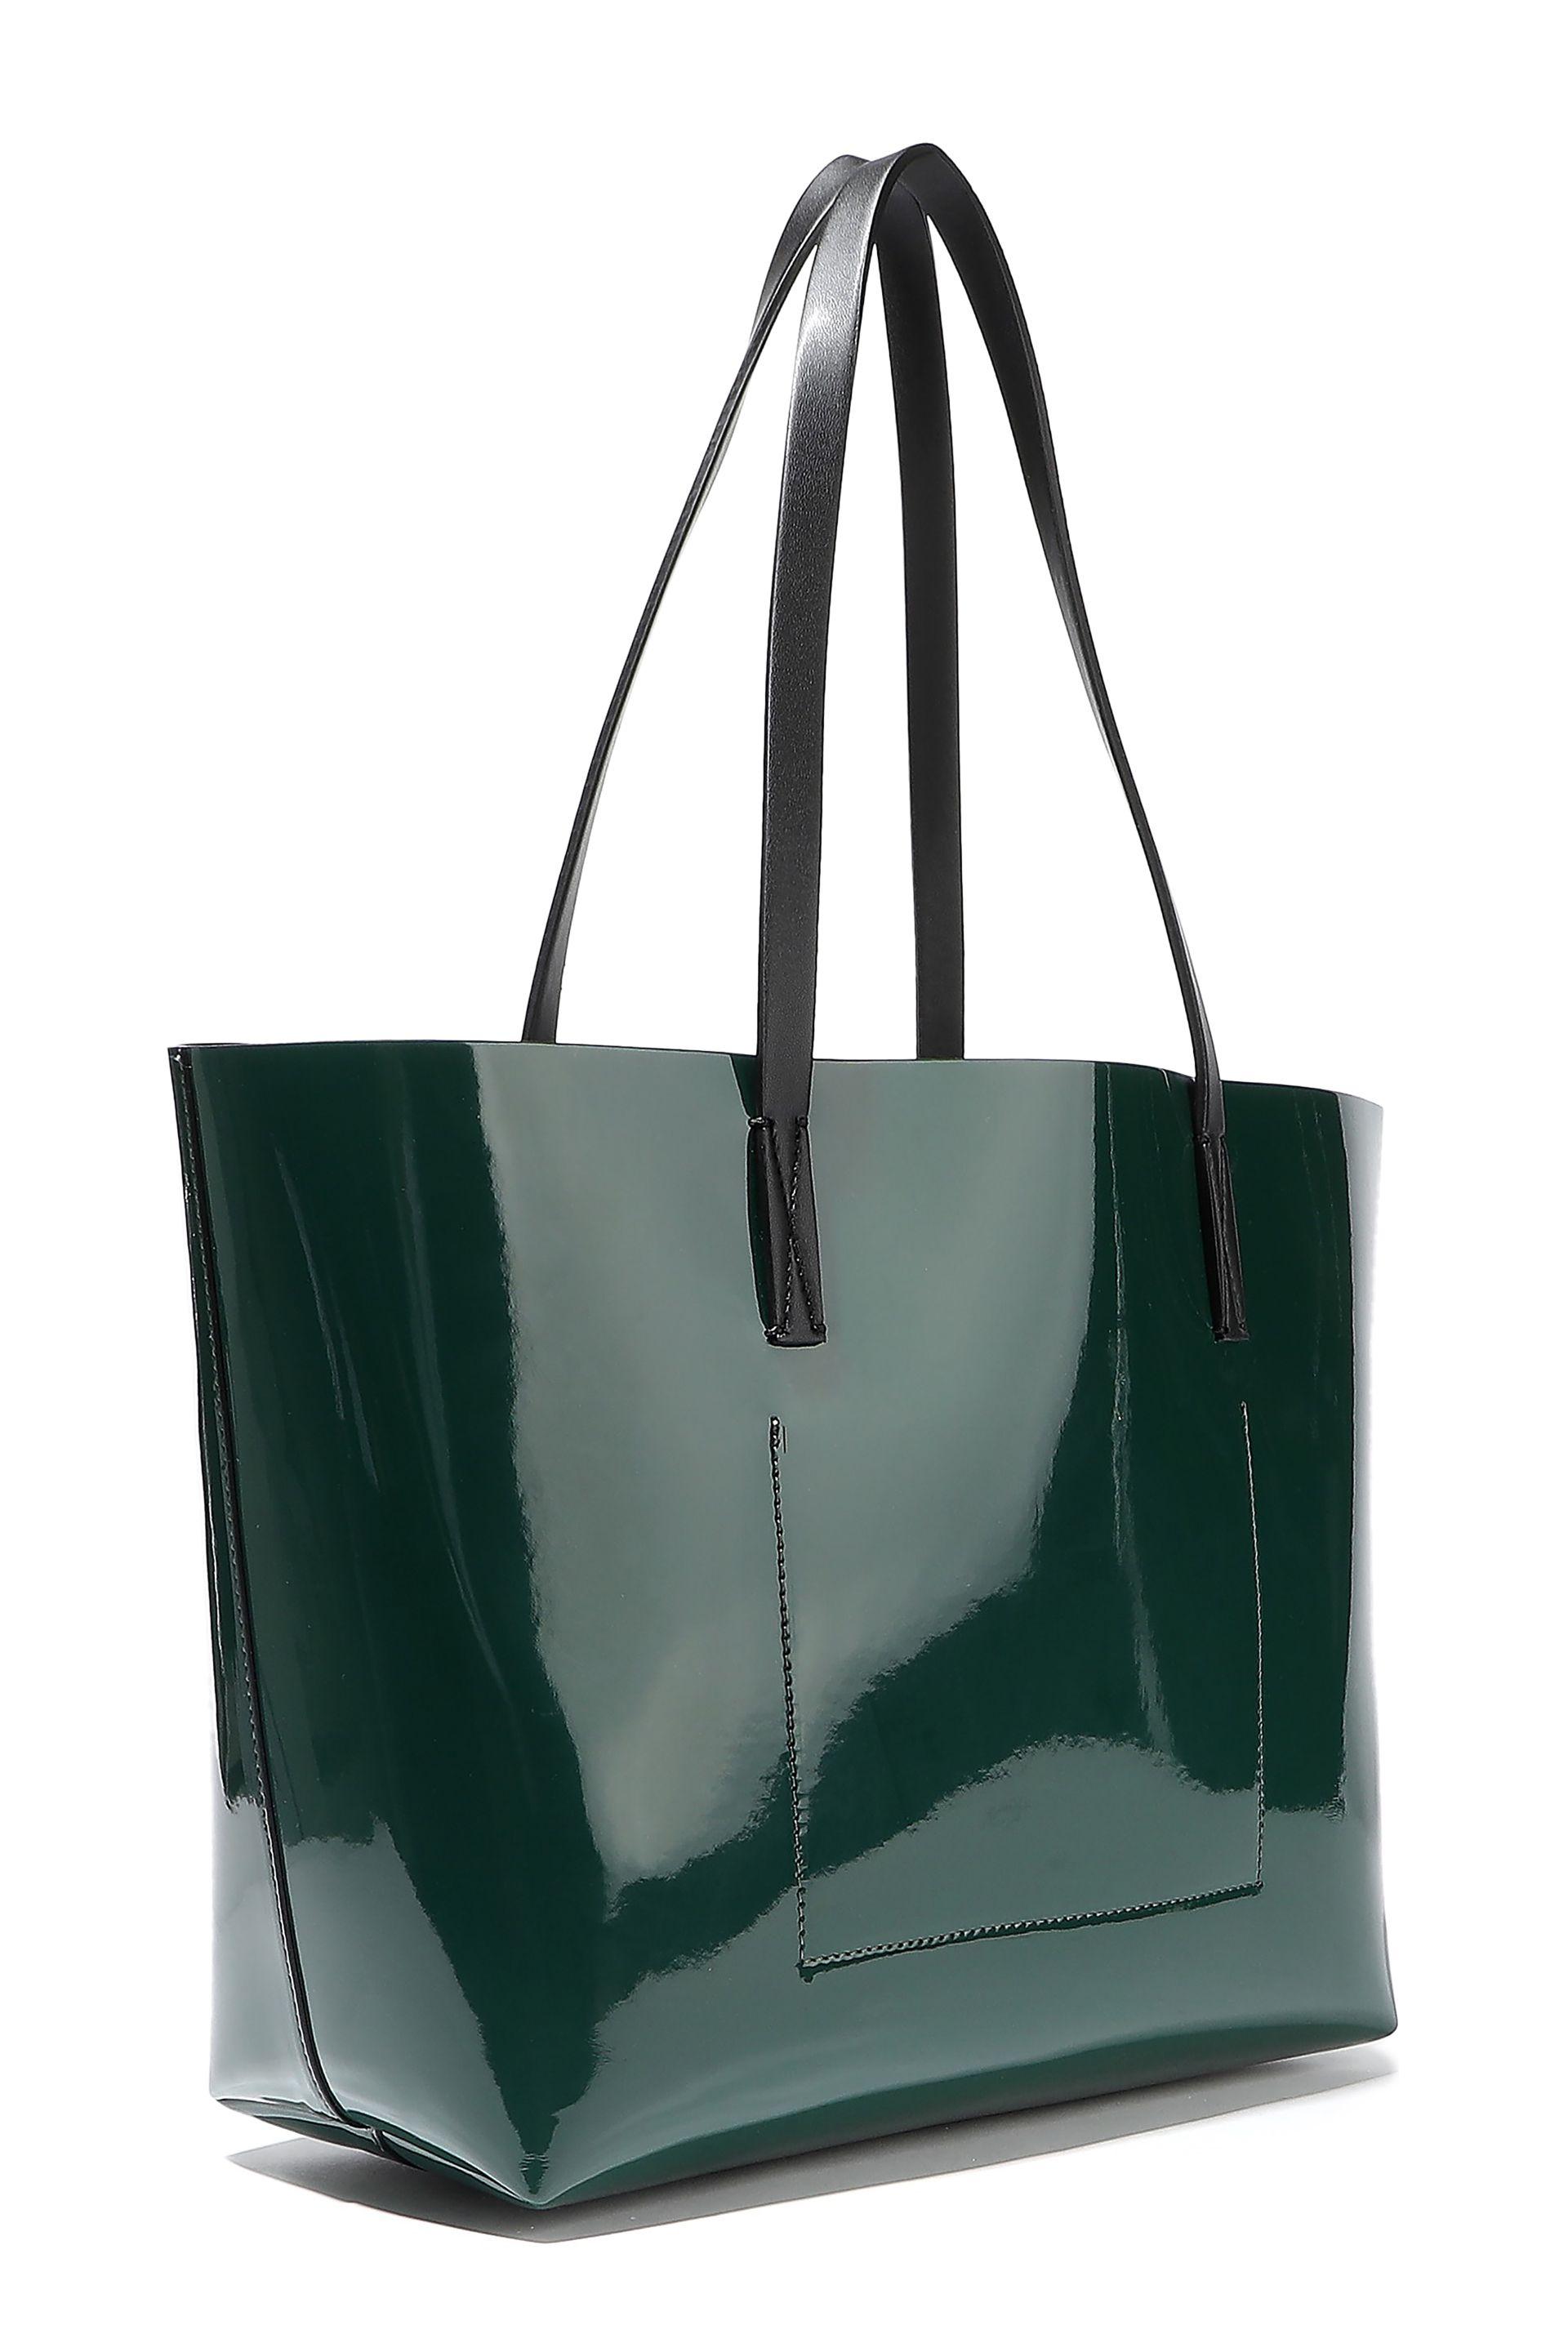 Marni Faux Patent-leather Tote Emerald in Green - Lyst